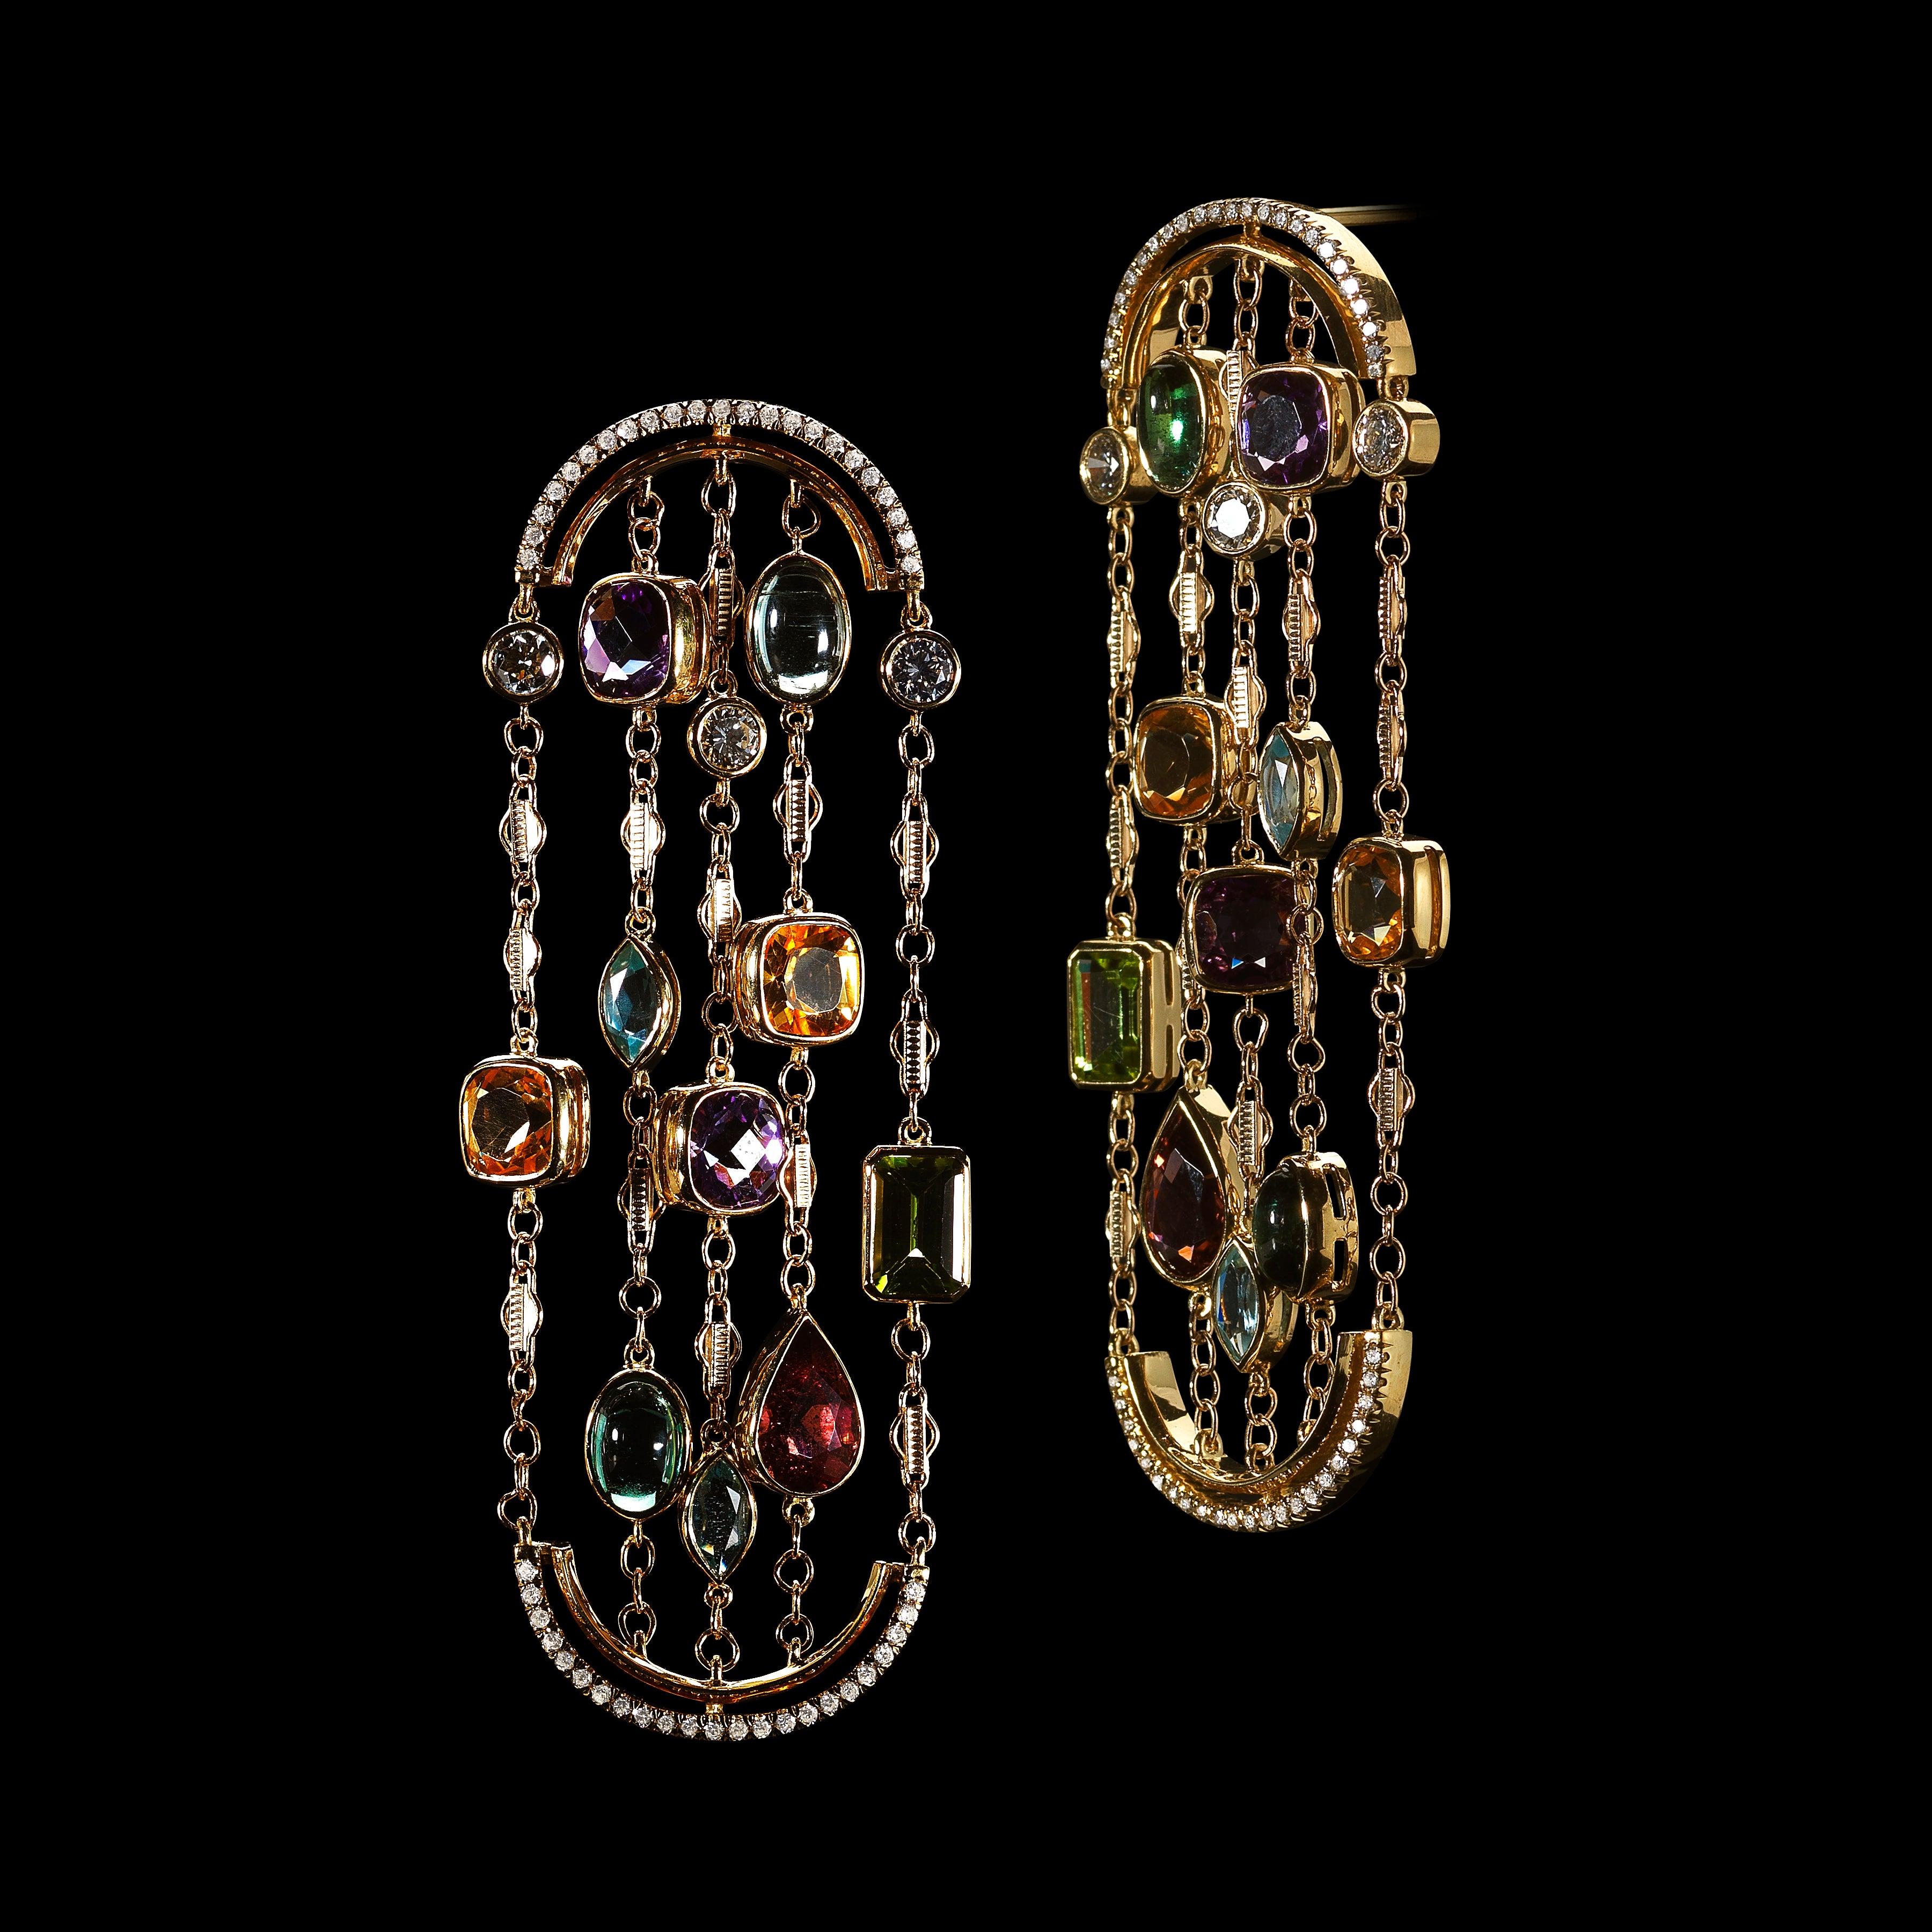 Contemporary Arched Sautior Earrings with Diamonds, Precious Stones and Snowflakes For Sale